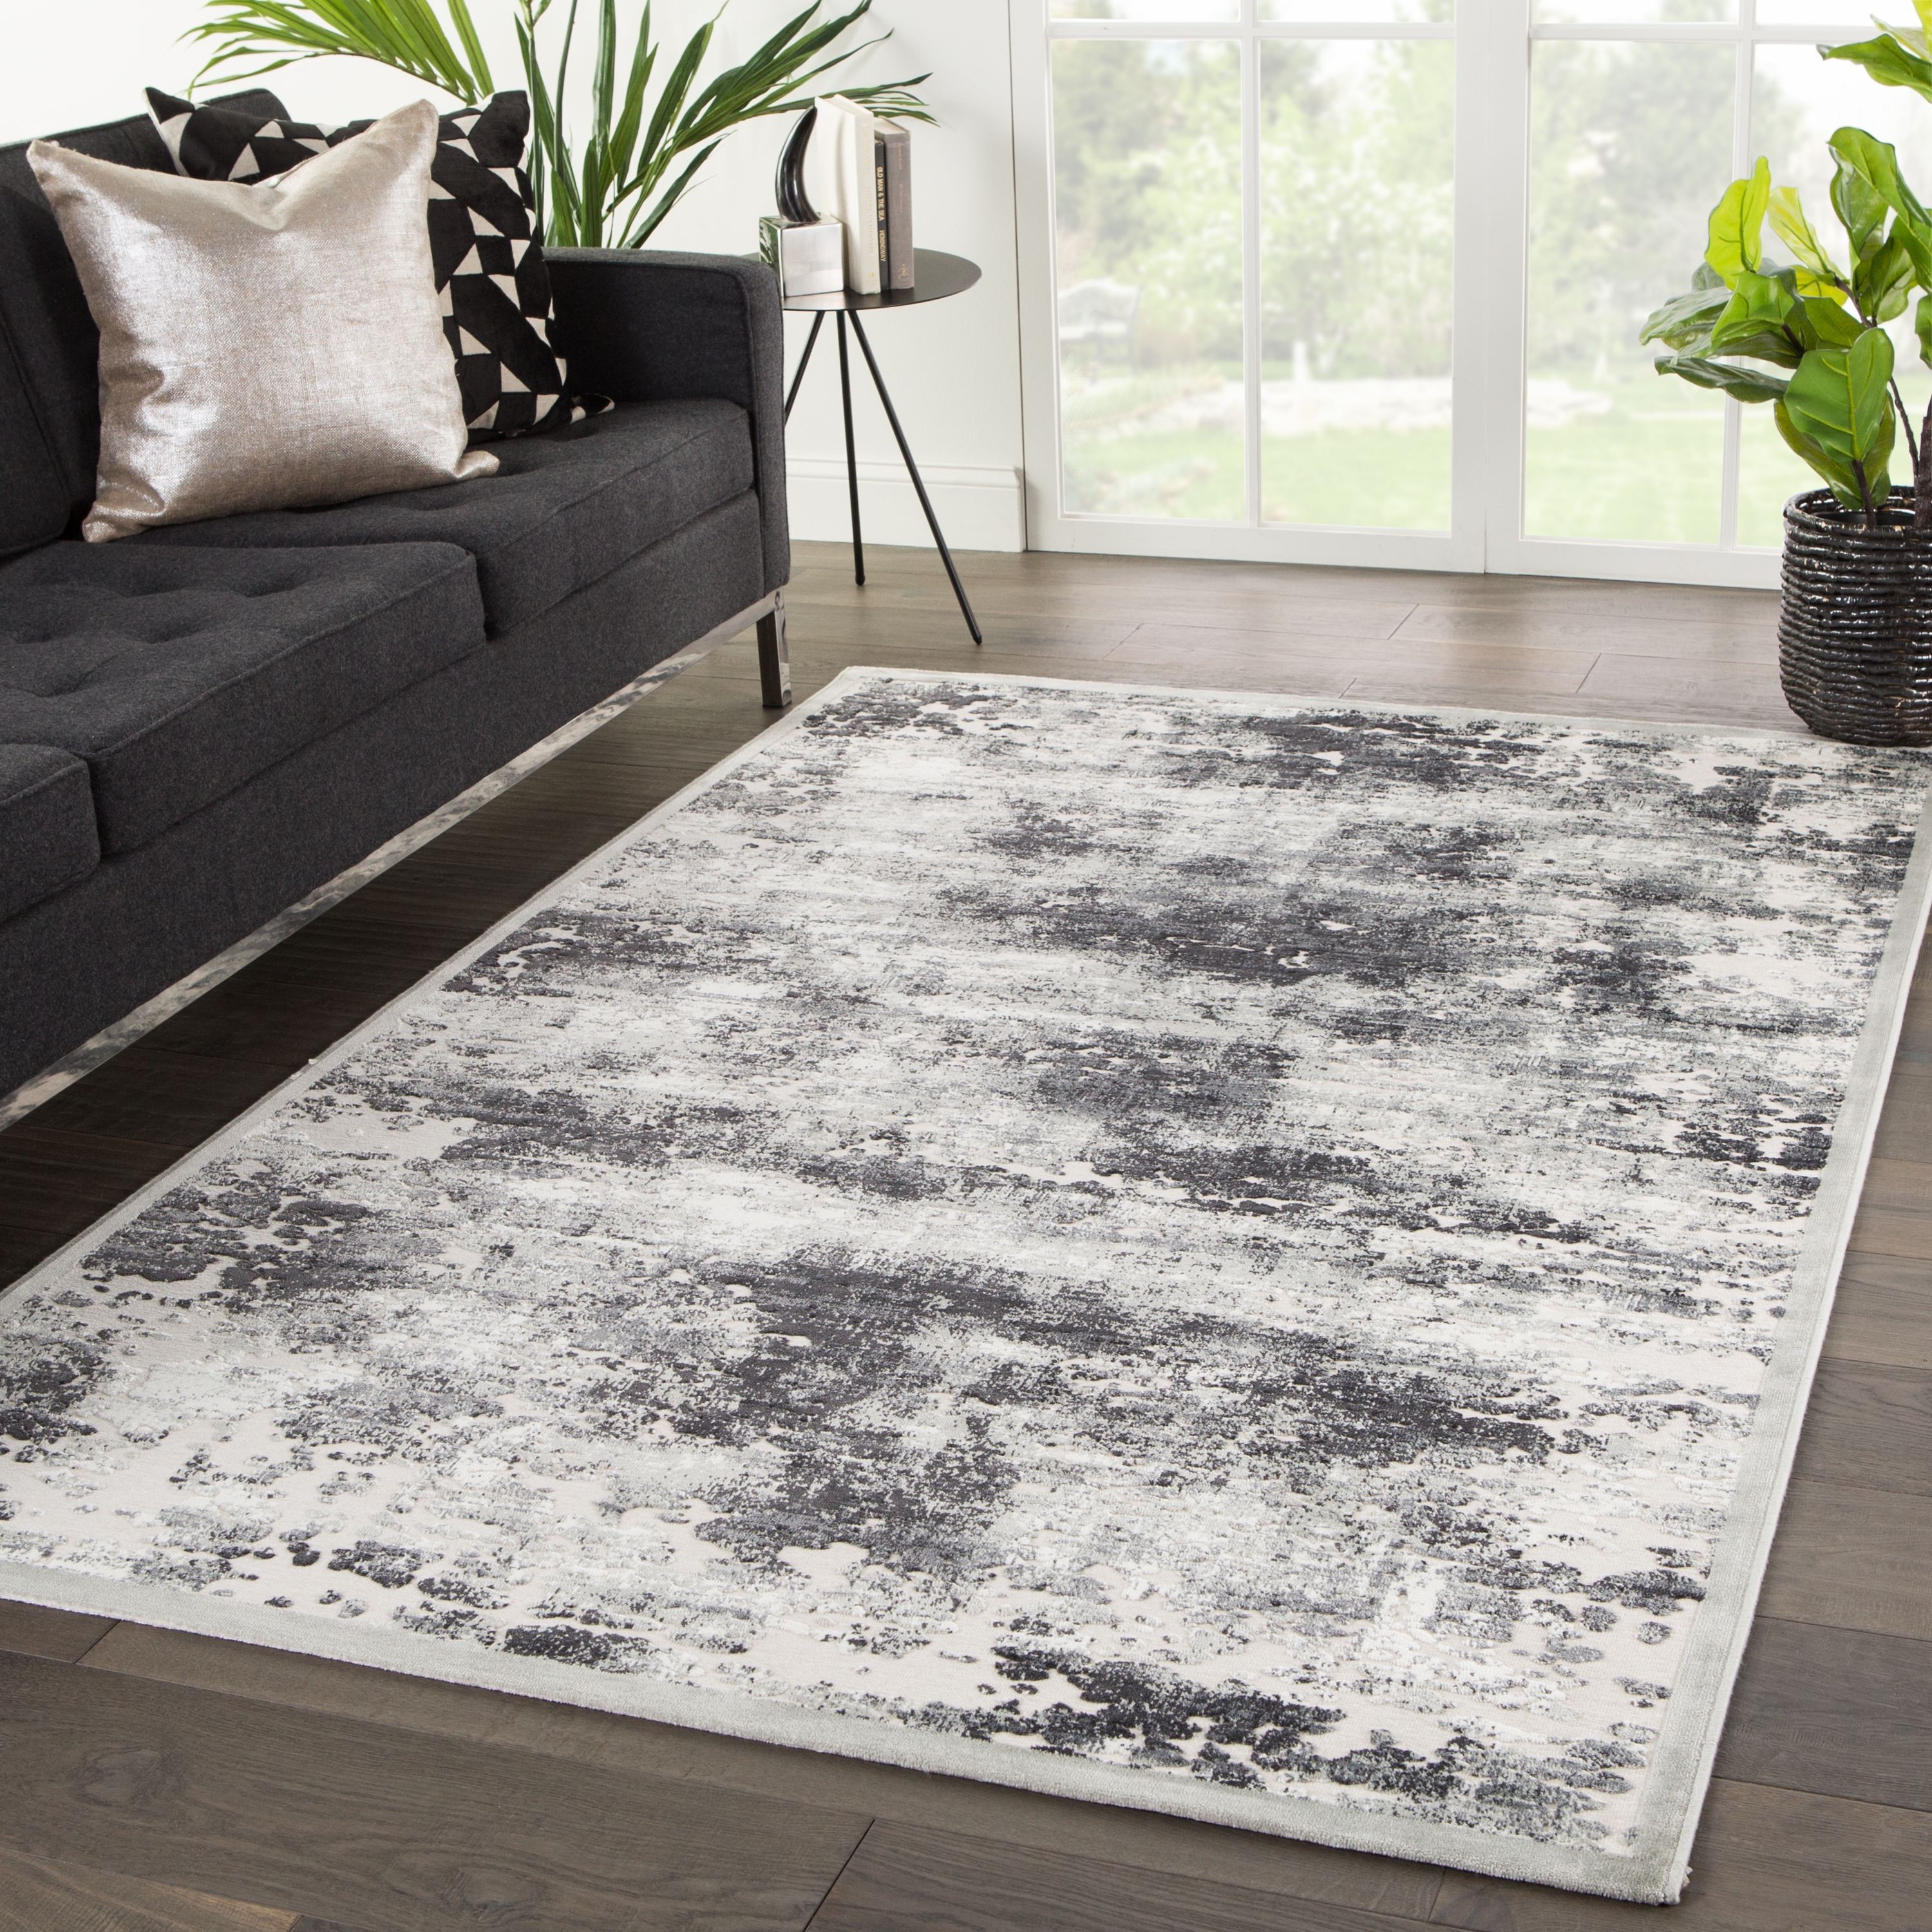 Trista Abstract Gray/ White Area Rug (5'X7'6") - Image 4